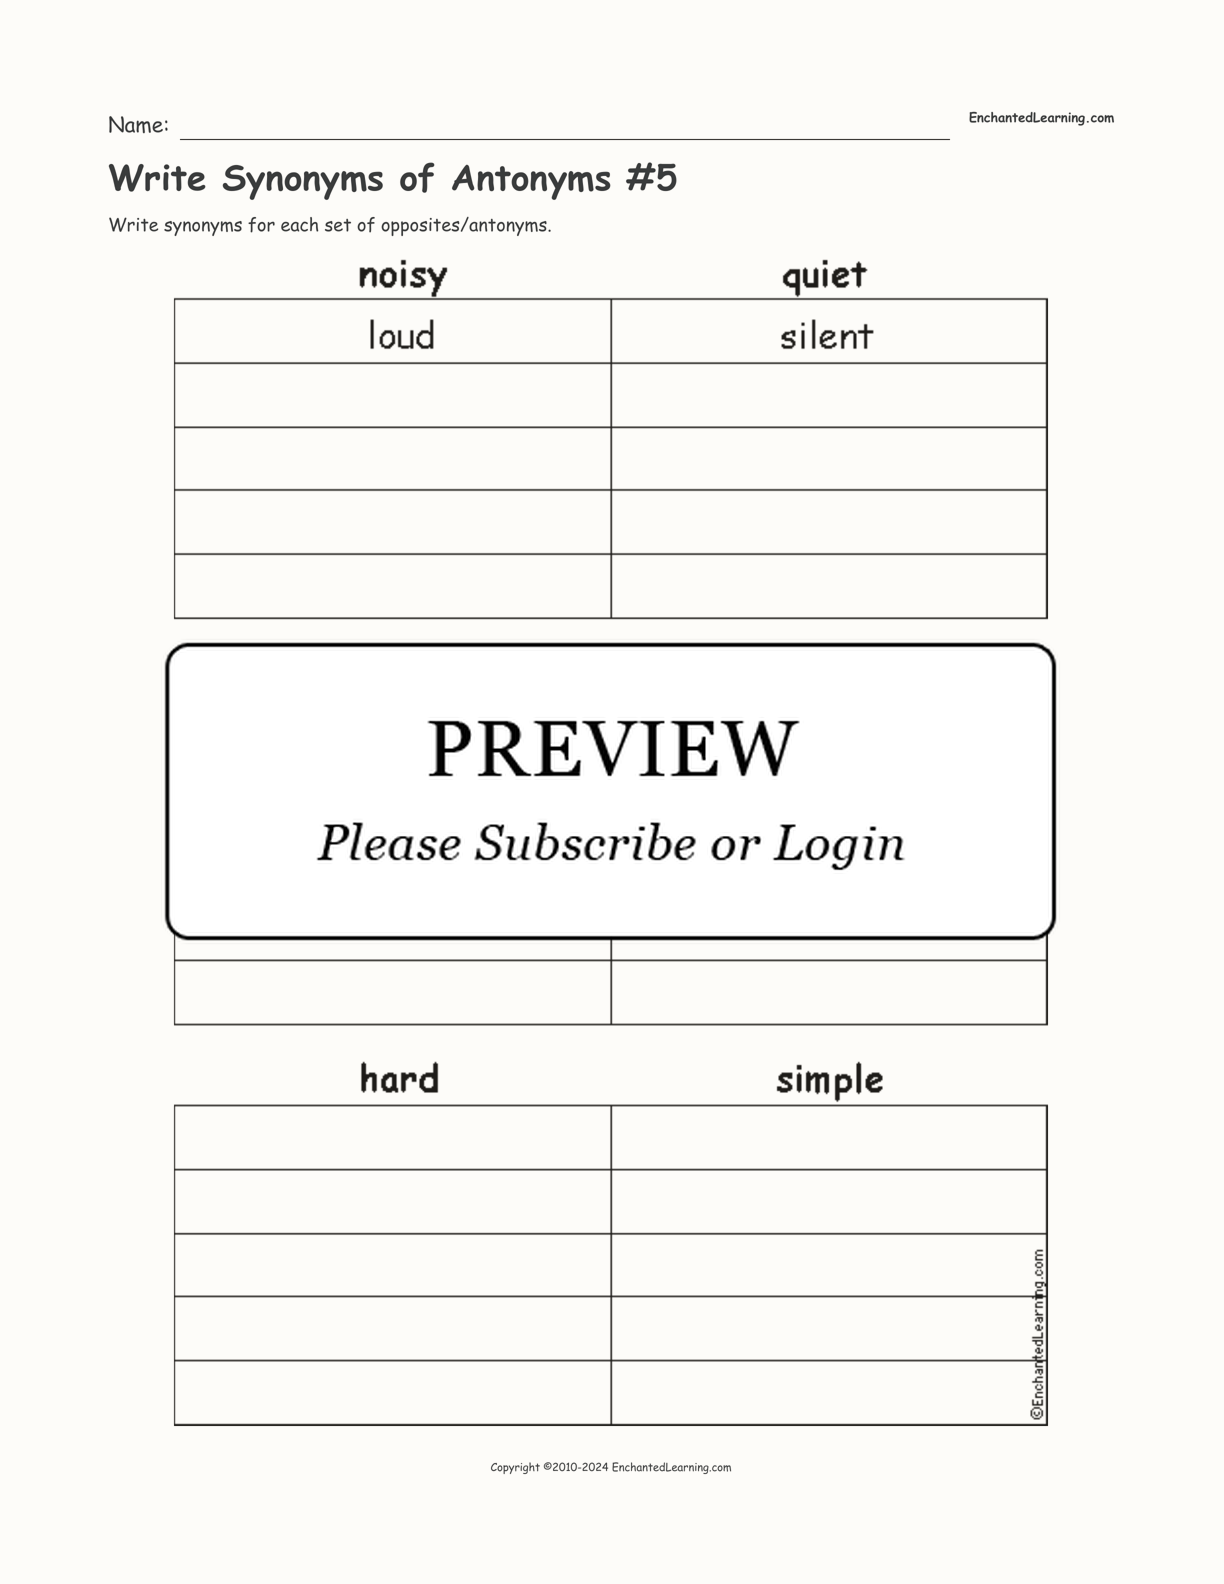 Write Synonyms of Antonyms #5 interactive worksheet page 1